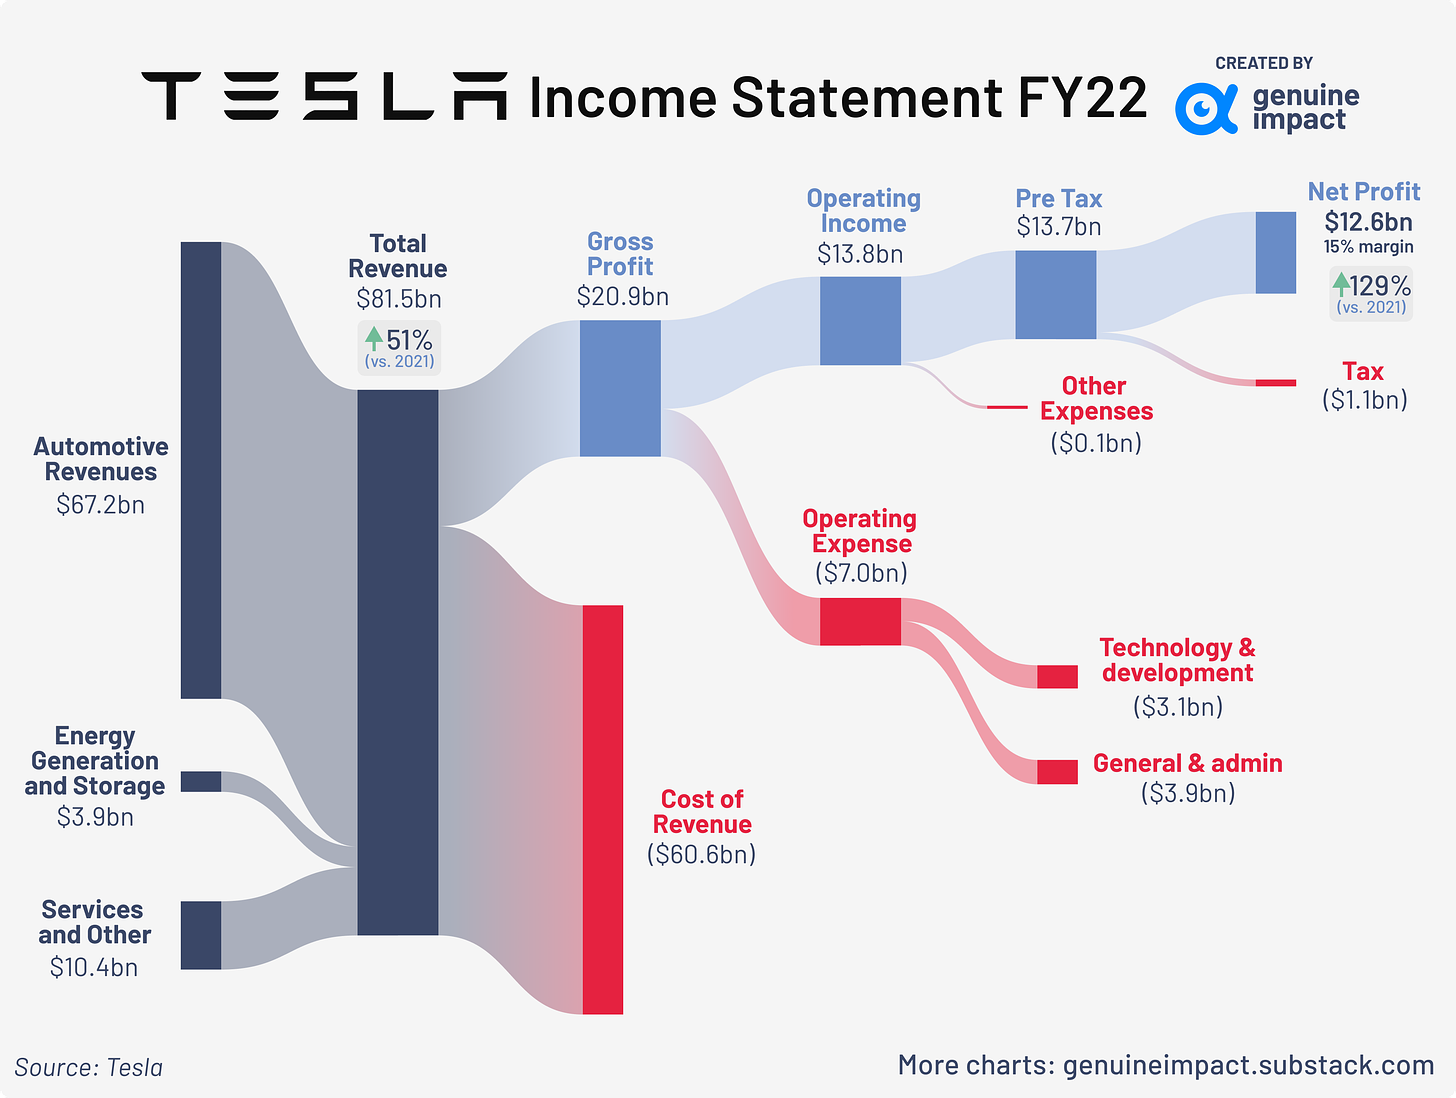 Tesla's moat in 18 charts 🚙